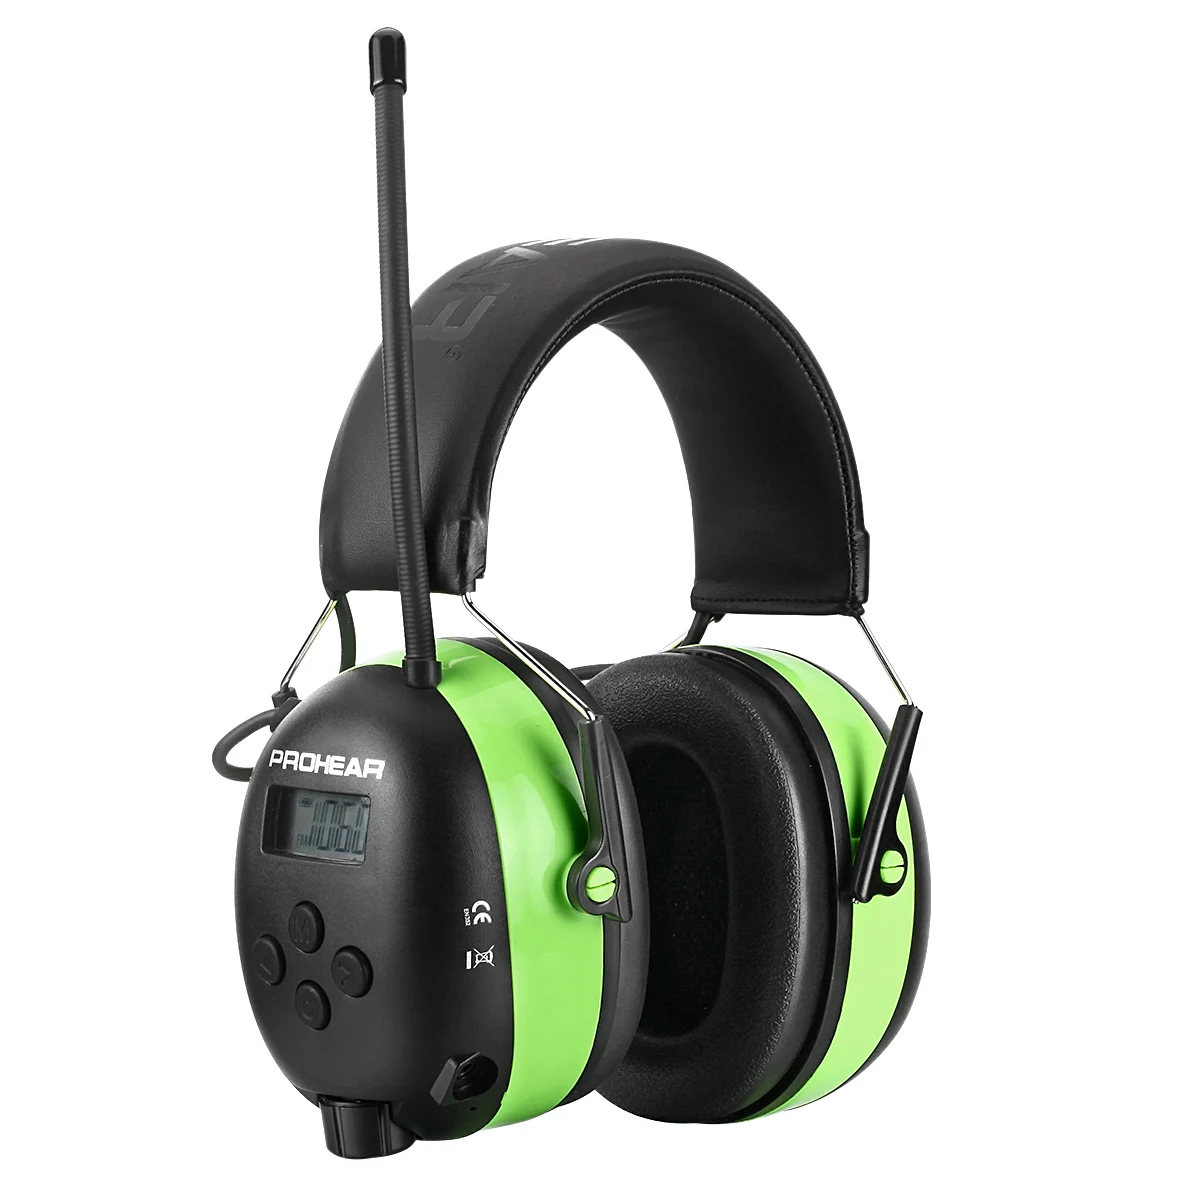 
EM033 Bluetooth Workplace Safety Hearing Protection DAB Radio Ear Muffs for Mowing Lawn 